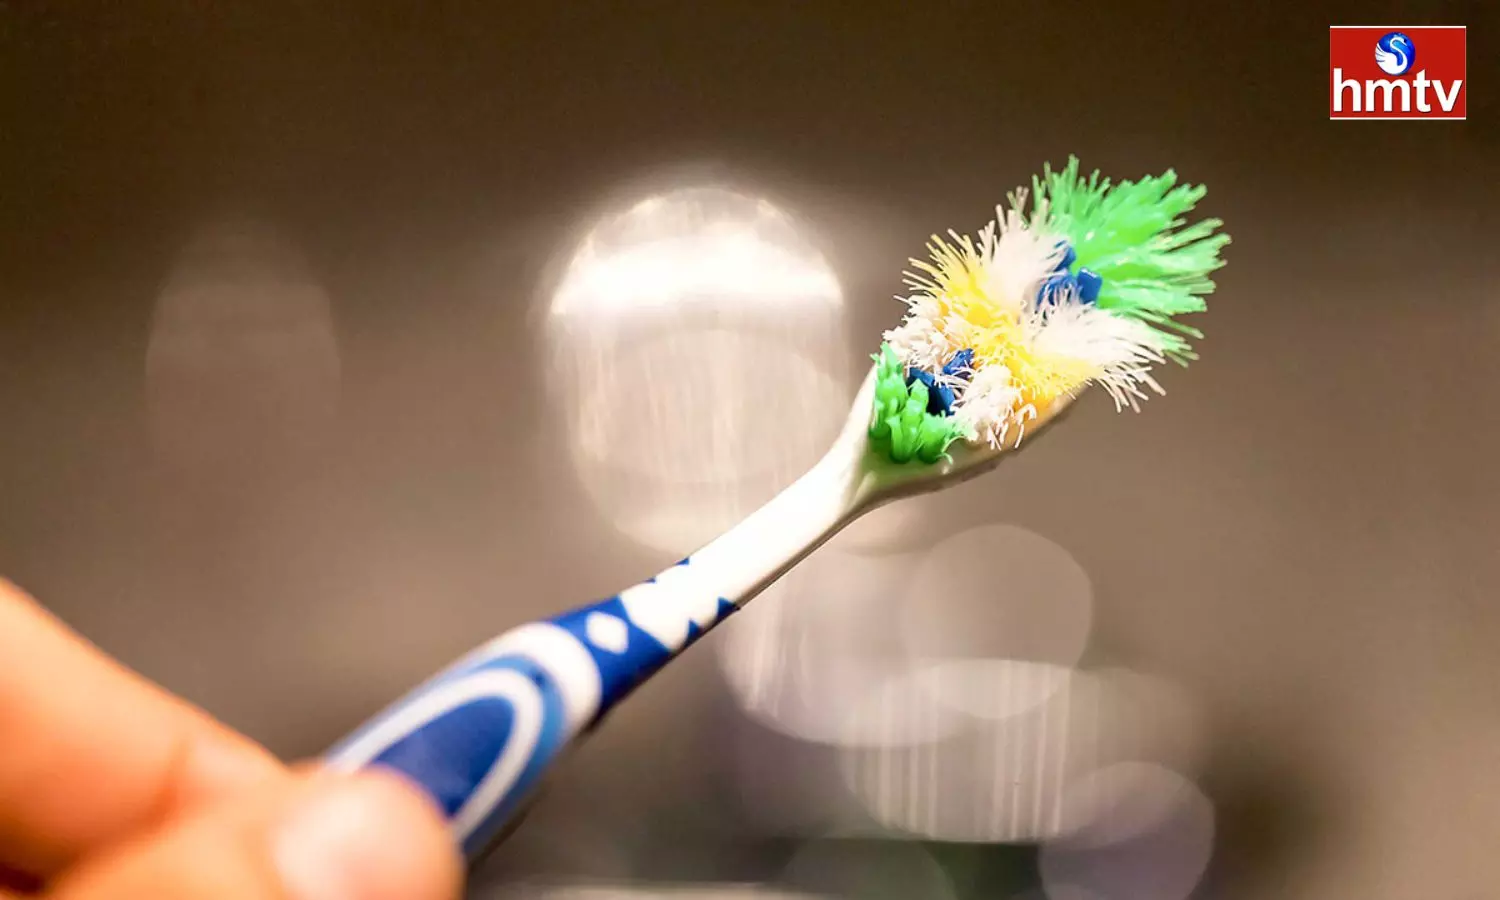 Are you Using a Toothbrush for a Long Time